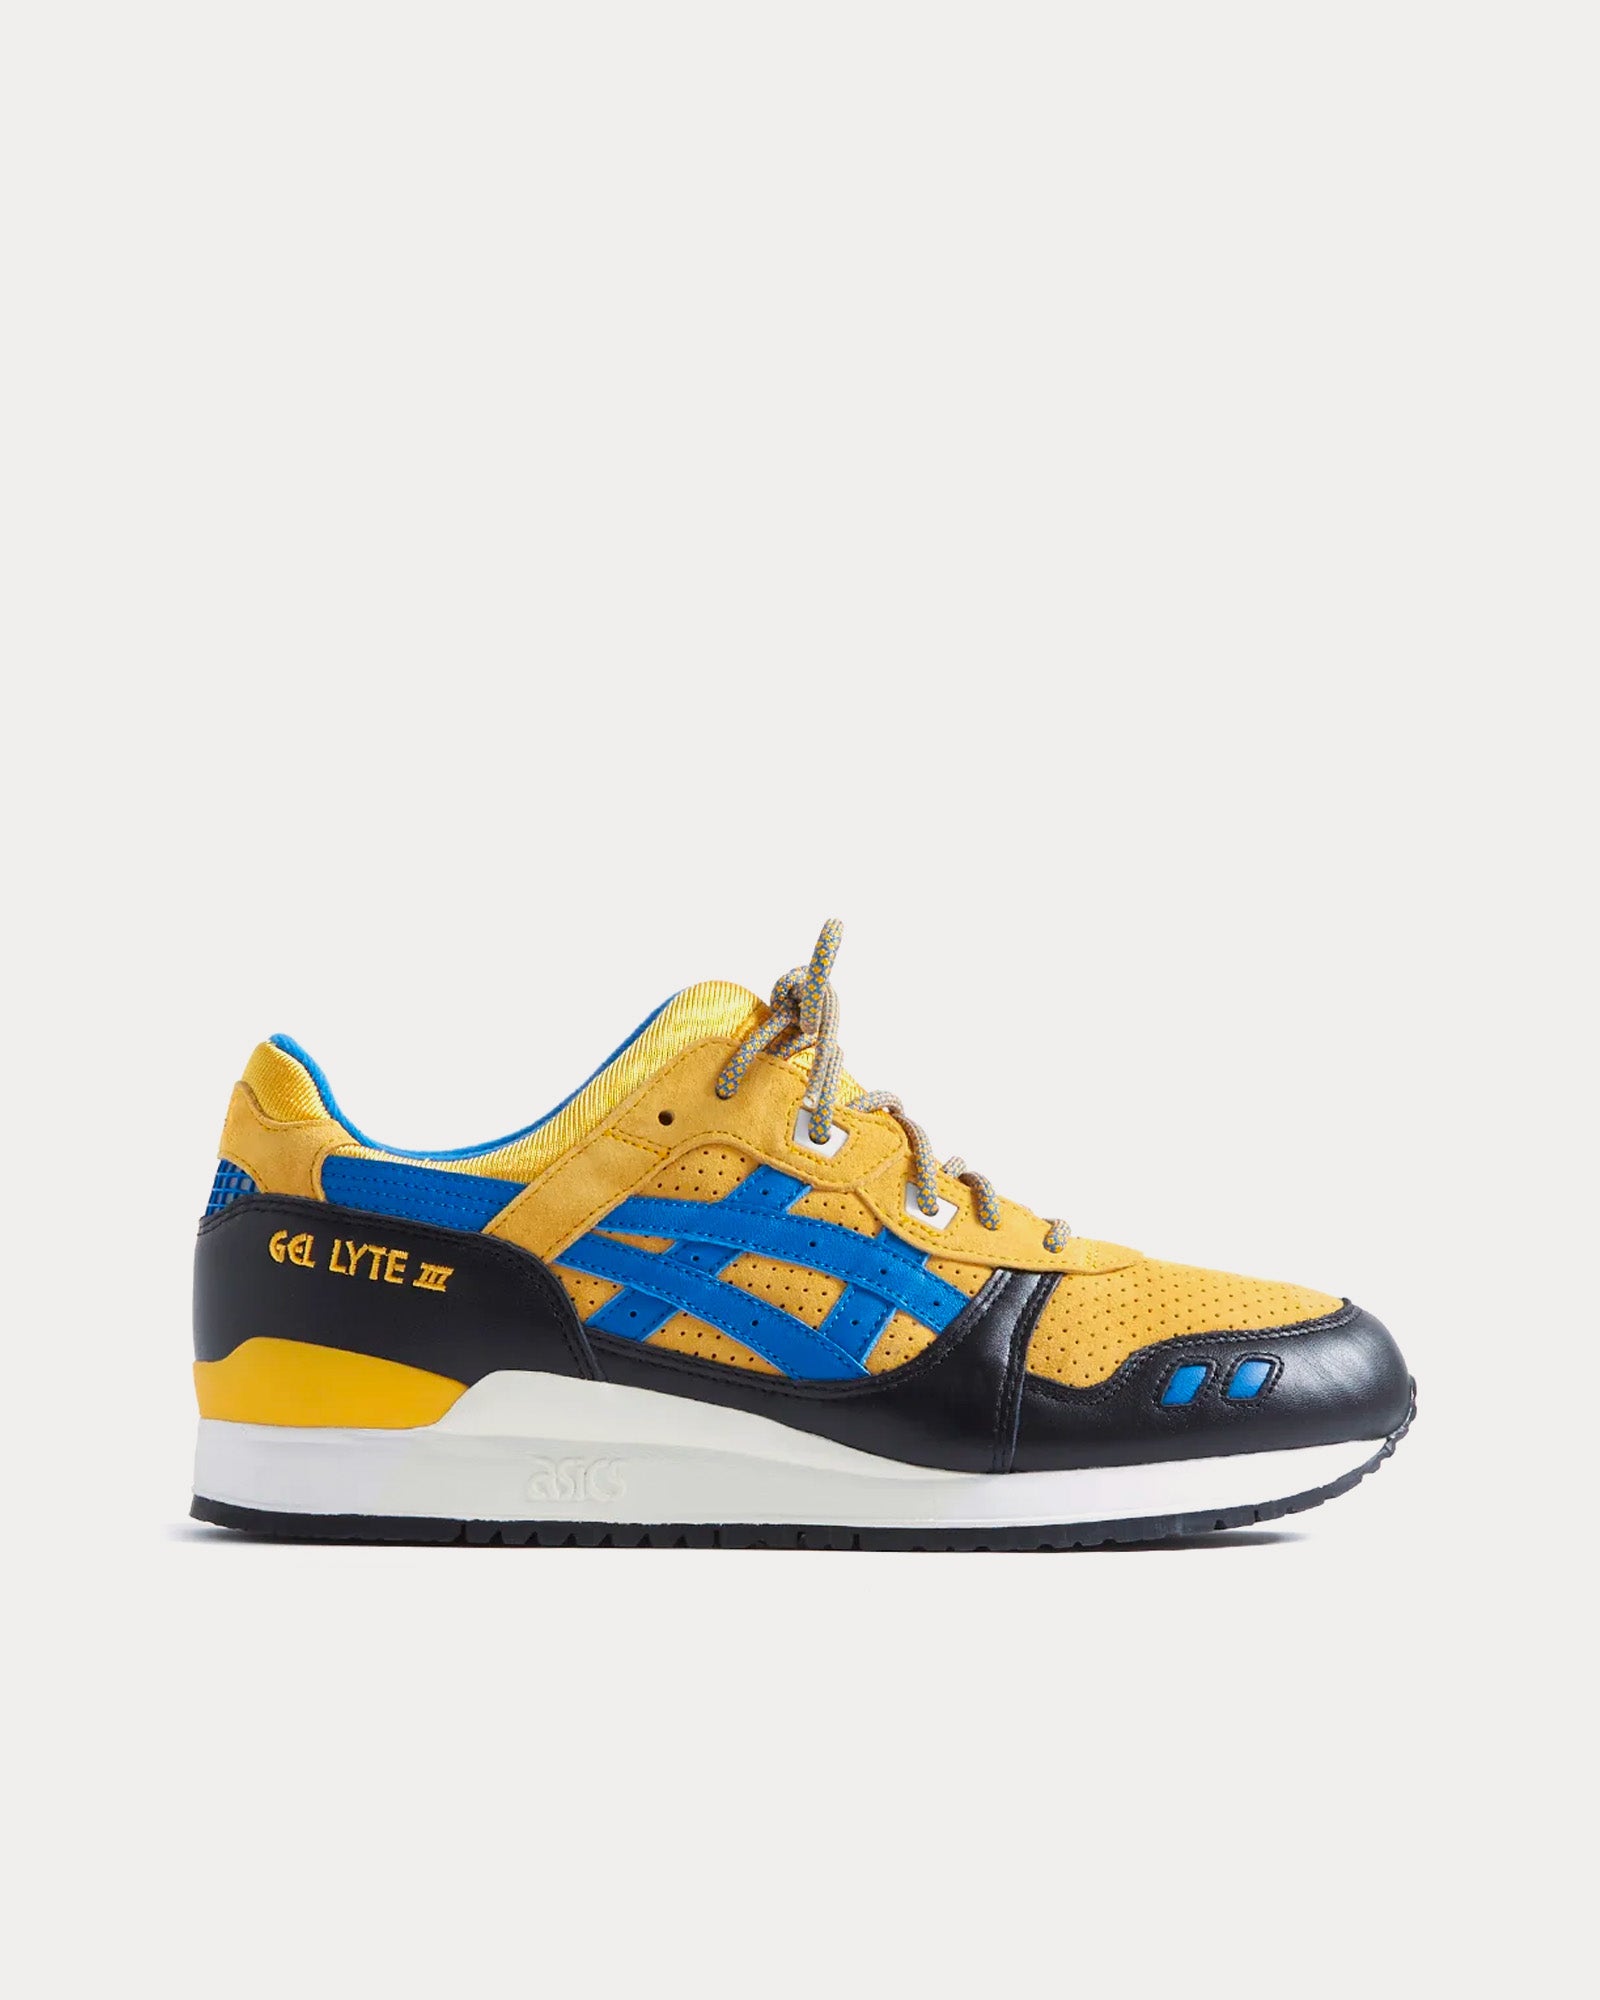 Asics x Kith - Marvel Gel-Lyte III Remastered 'Wolverine 1975' Yellow / Blue Low Top Sneakers